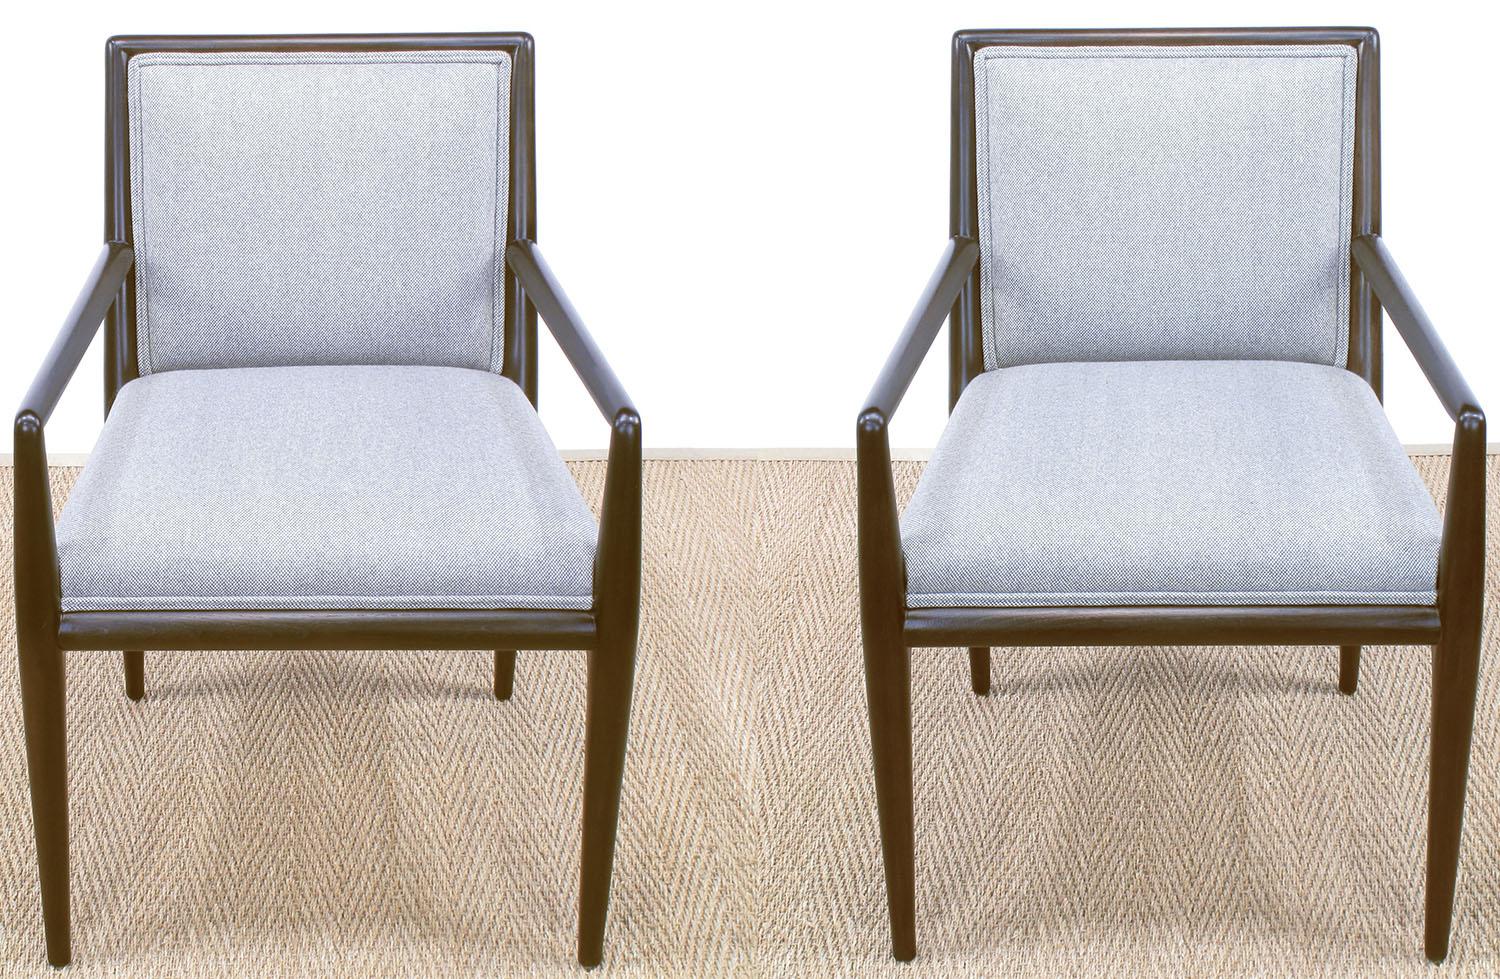 Pair of expertly restored sleek lined arm chairs designed by T. H. Robsjohn-Gibbings for Widdicomb. Holland & Sherry wool upholstery in a grey and white very small checker board pattern. Satin finish to the dark walnut stain. A great pair of chairs